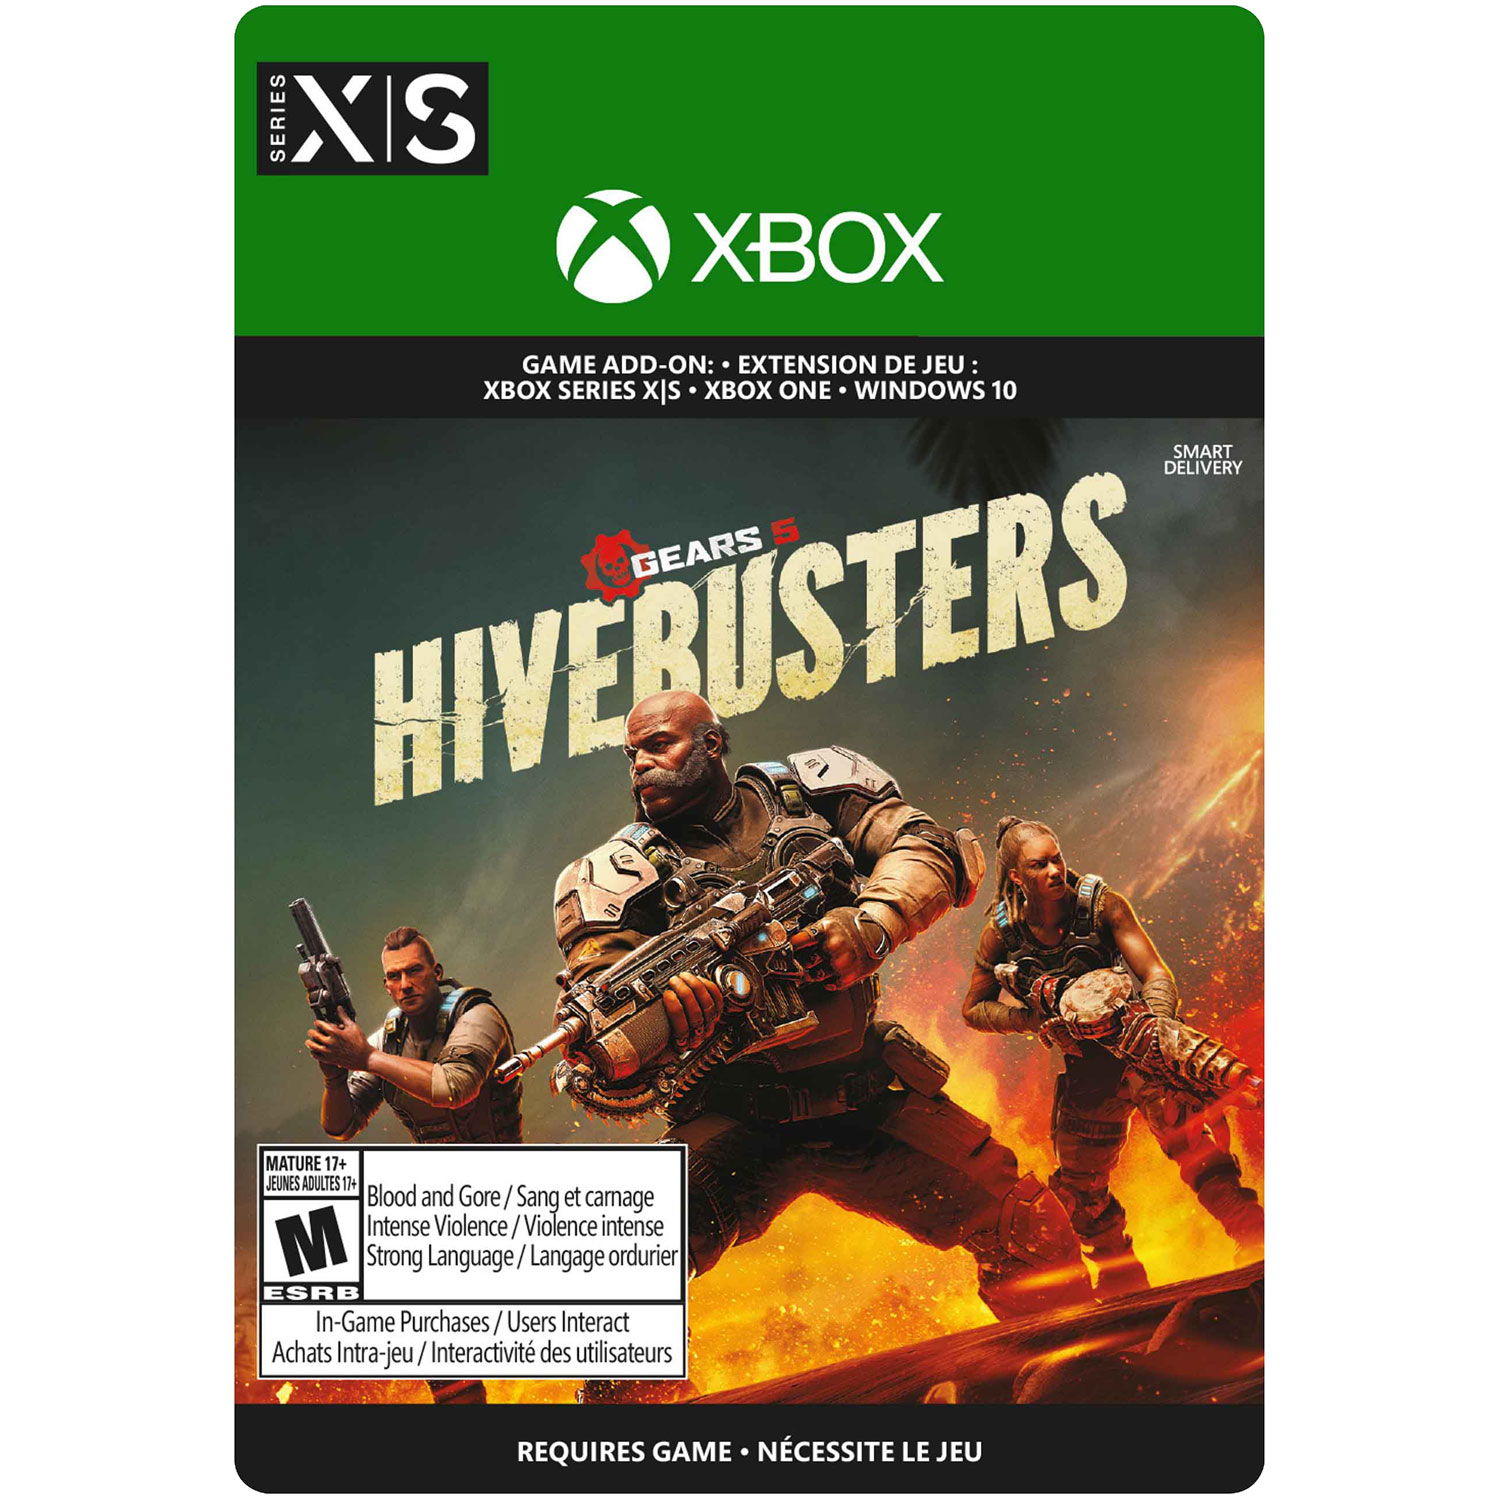 Gears 5: Hivebusters (Xbox Series X|S / Xbox One / Windows 10) - Digital Download